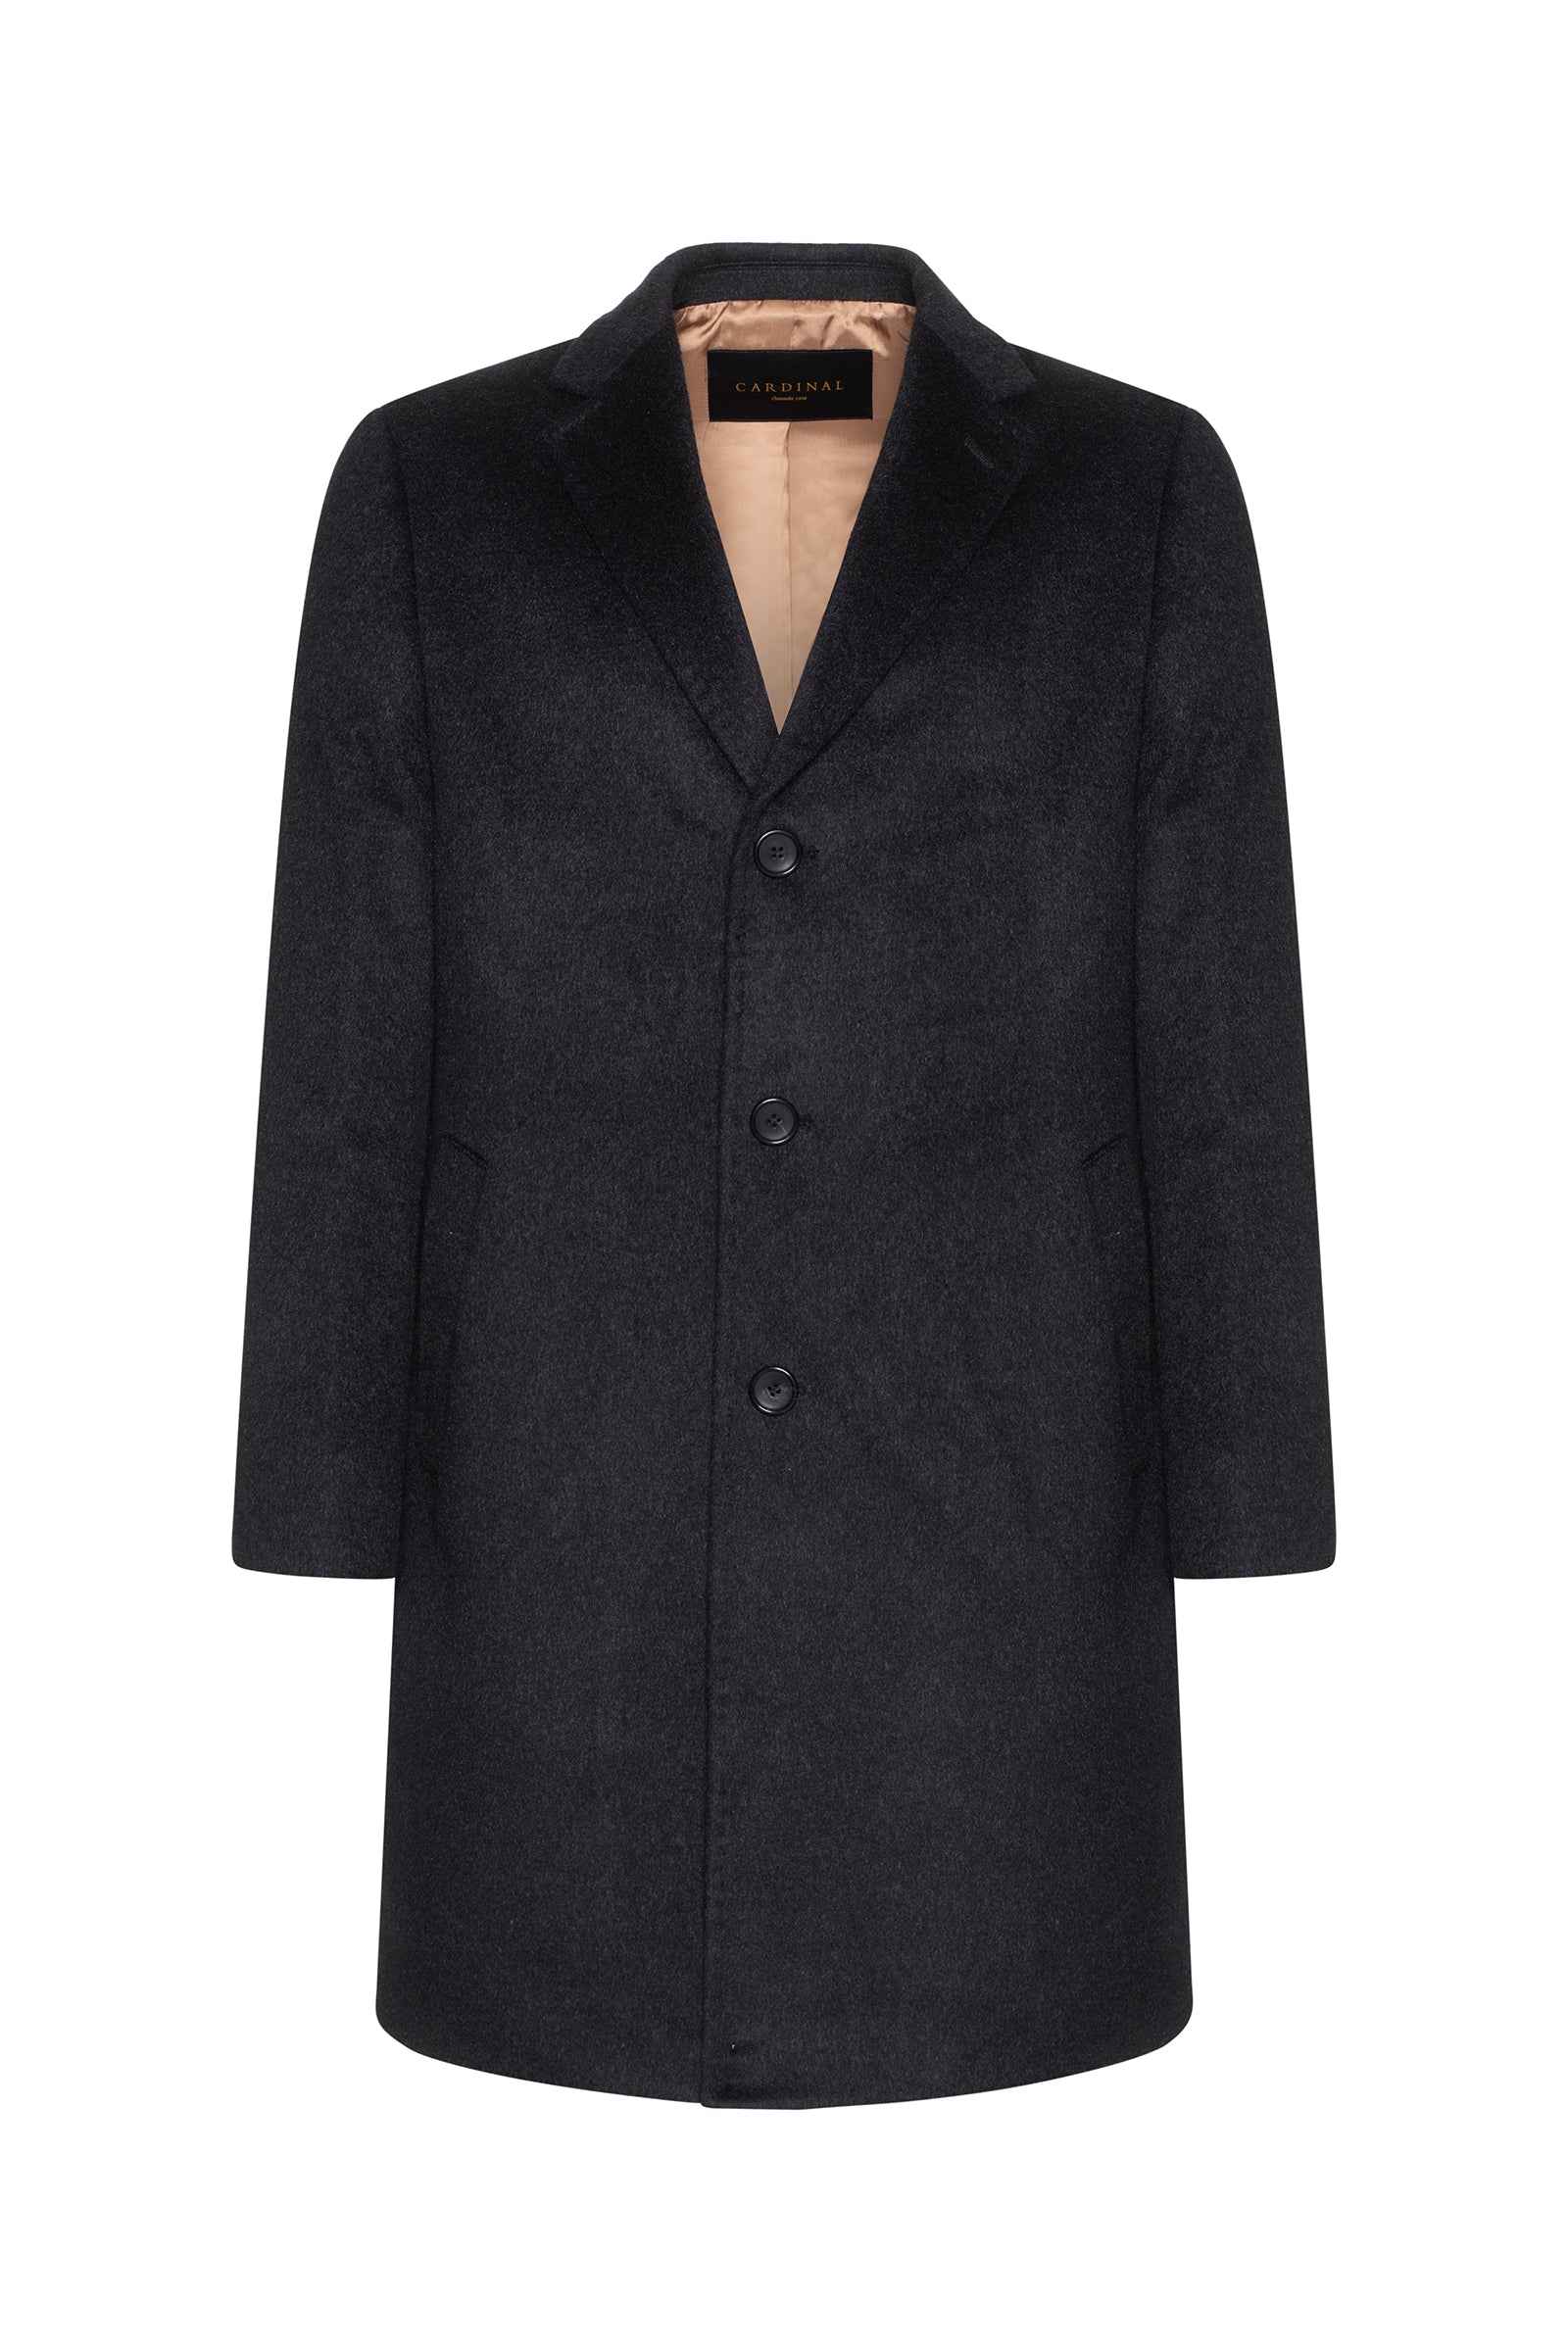 ST-PIERRE Charcoal CASHMERE TOPCOAT